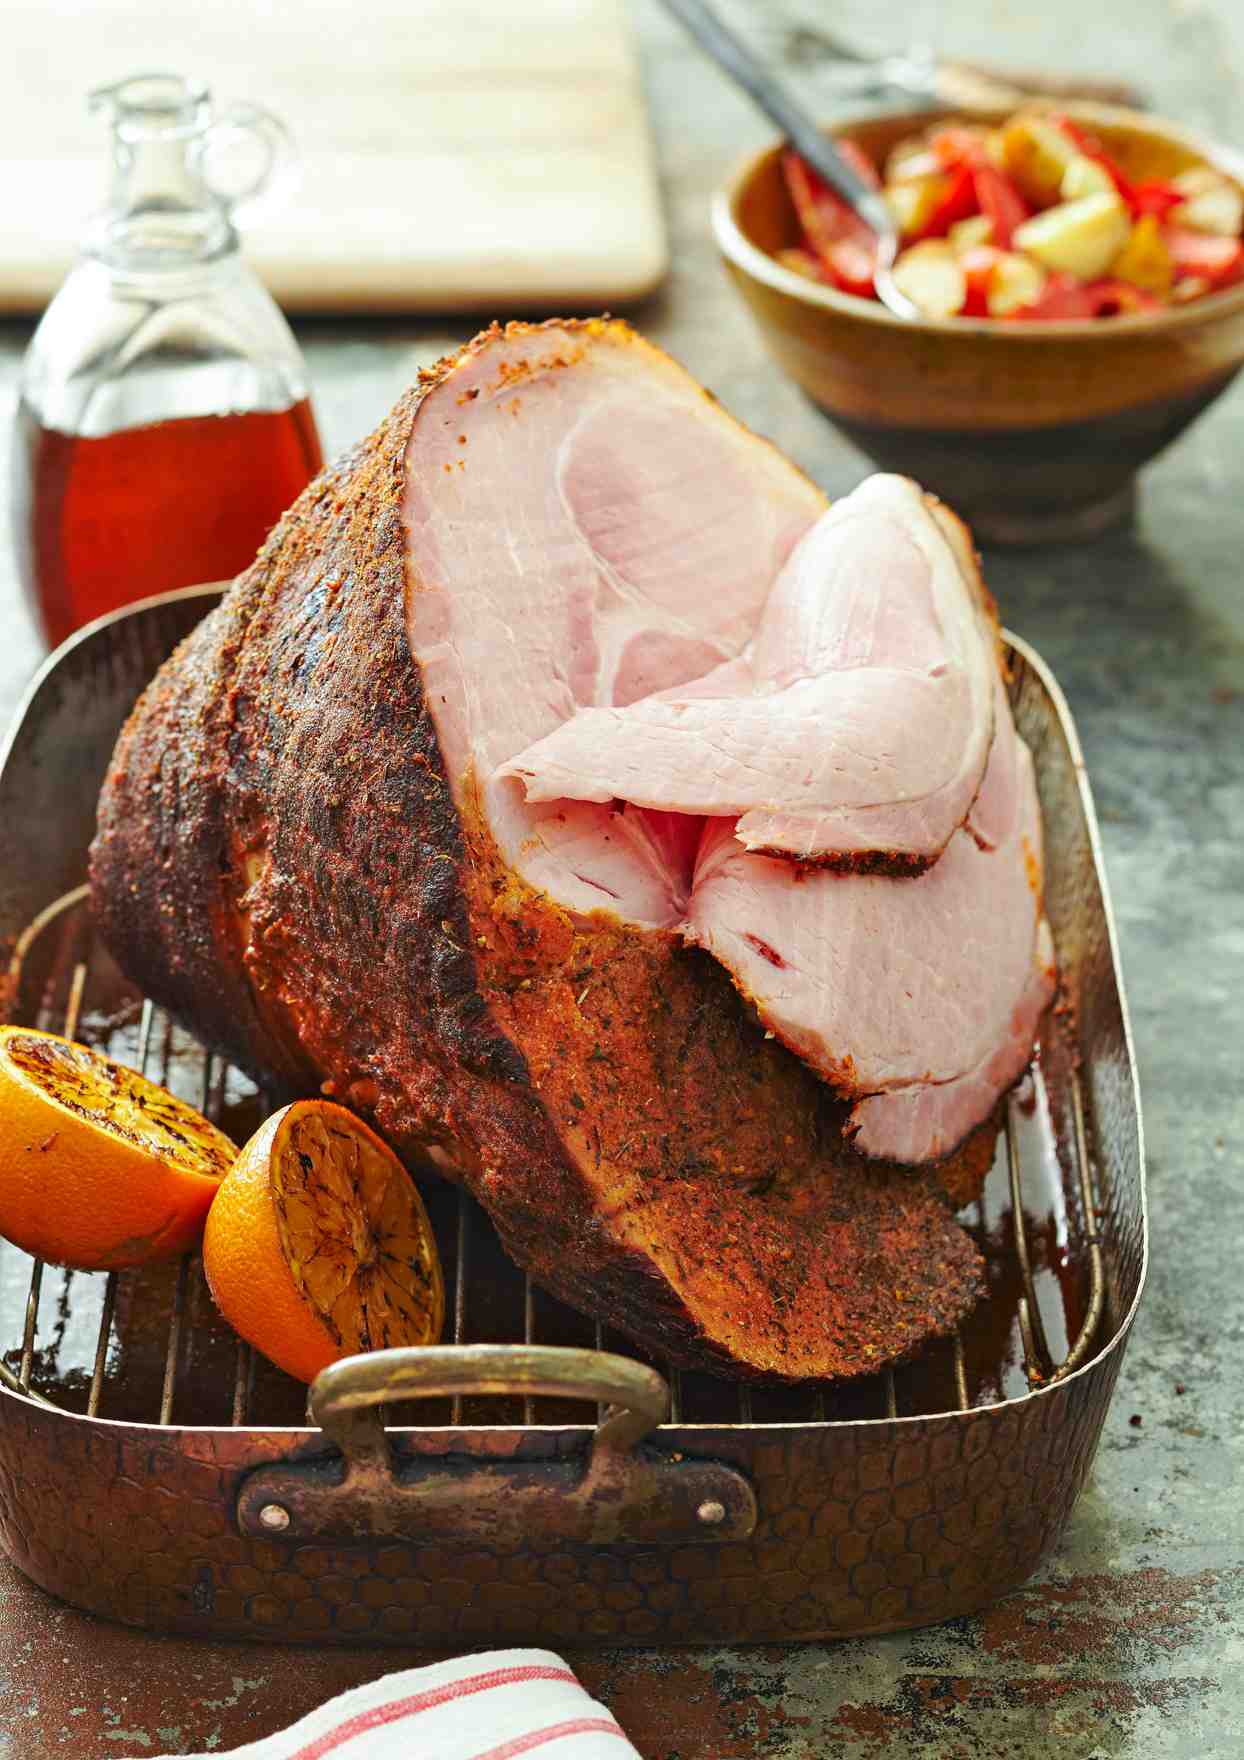 What happens if you undercooked ham?